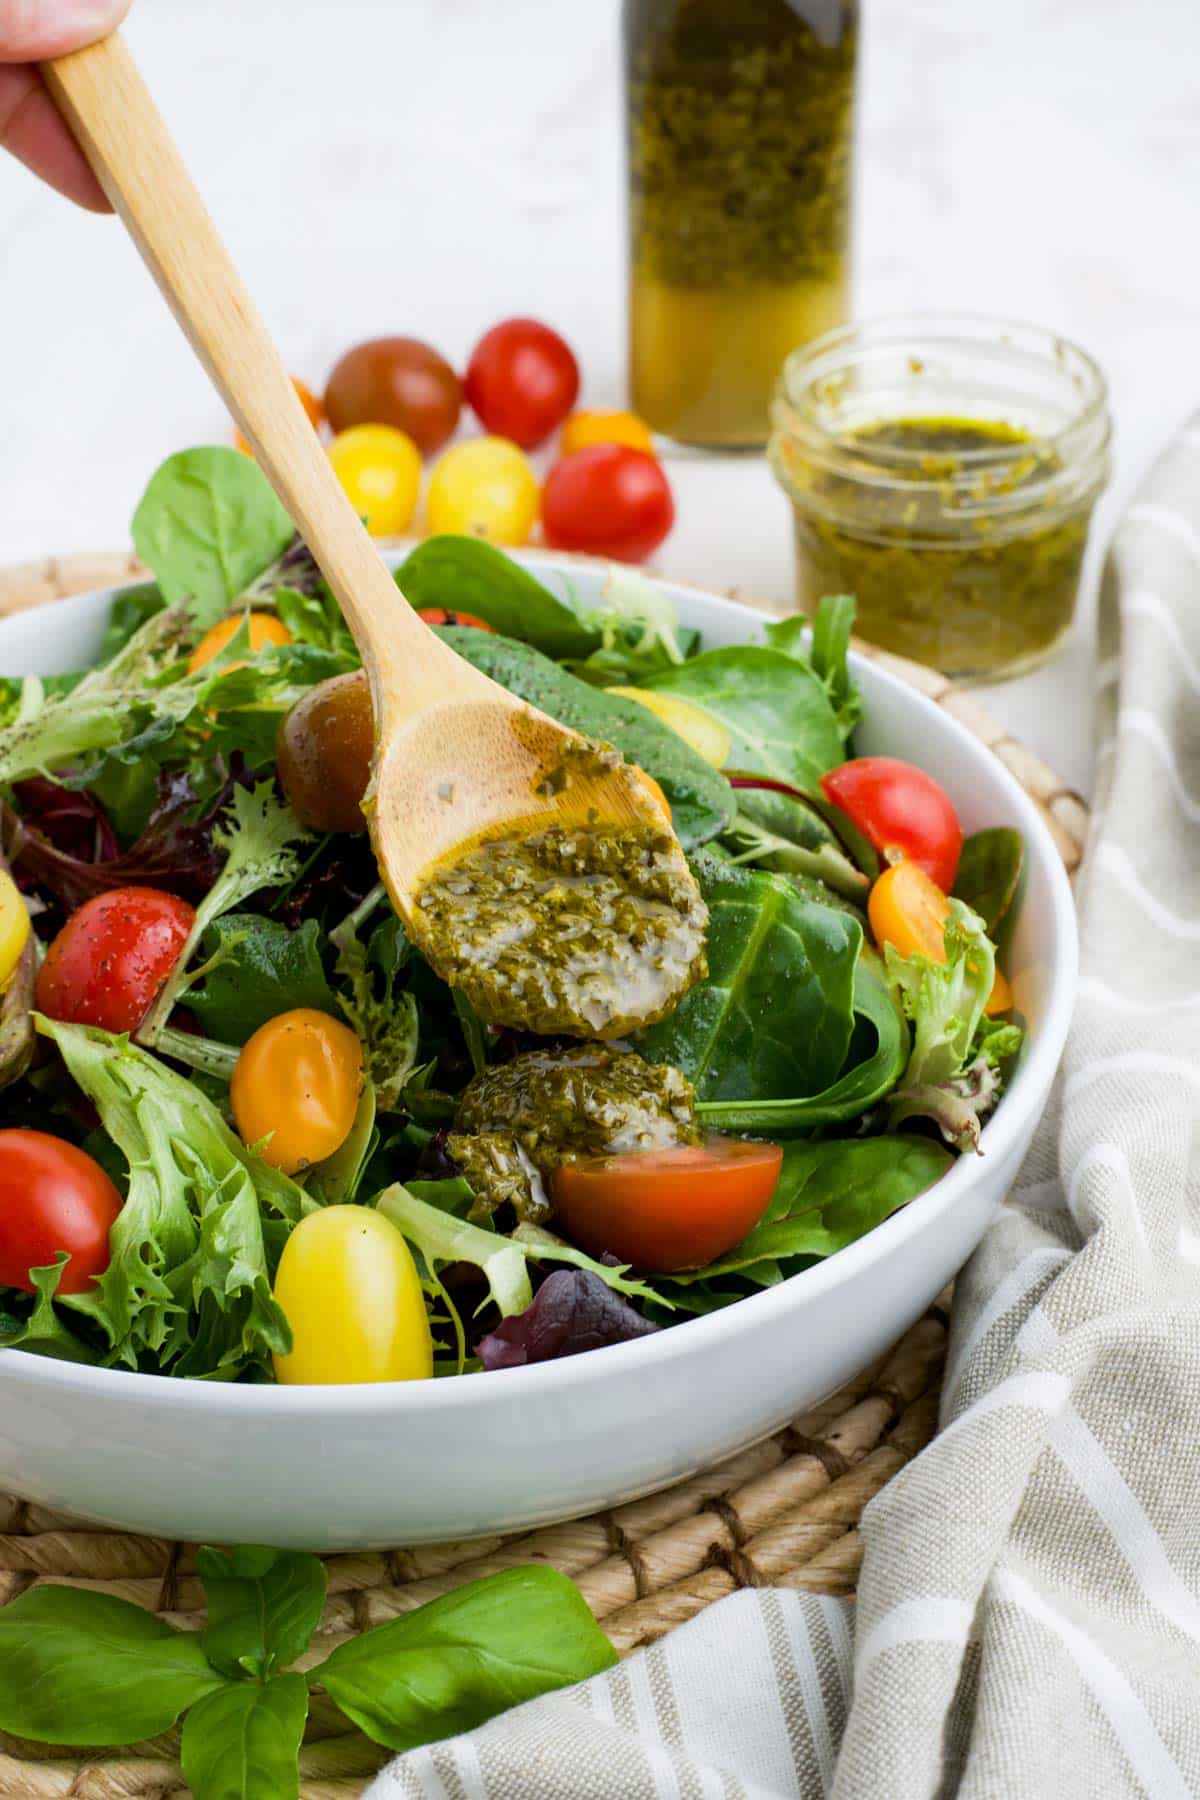 Salad with a spoonful of pesto salad dressing to pour over the top of the salad.